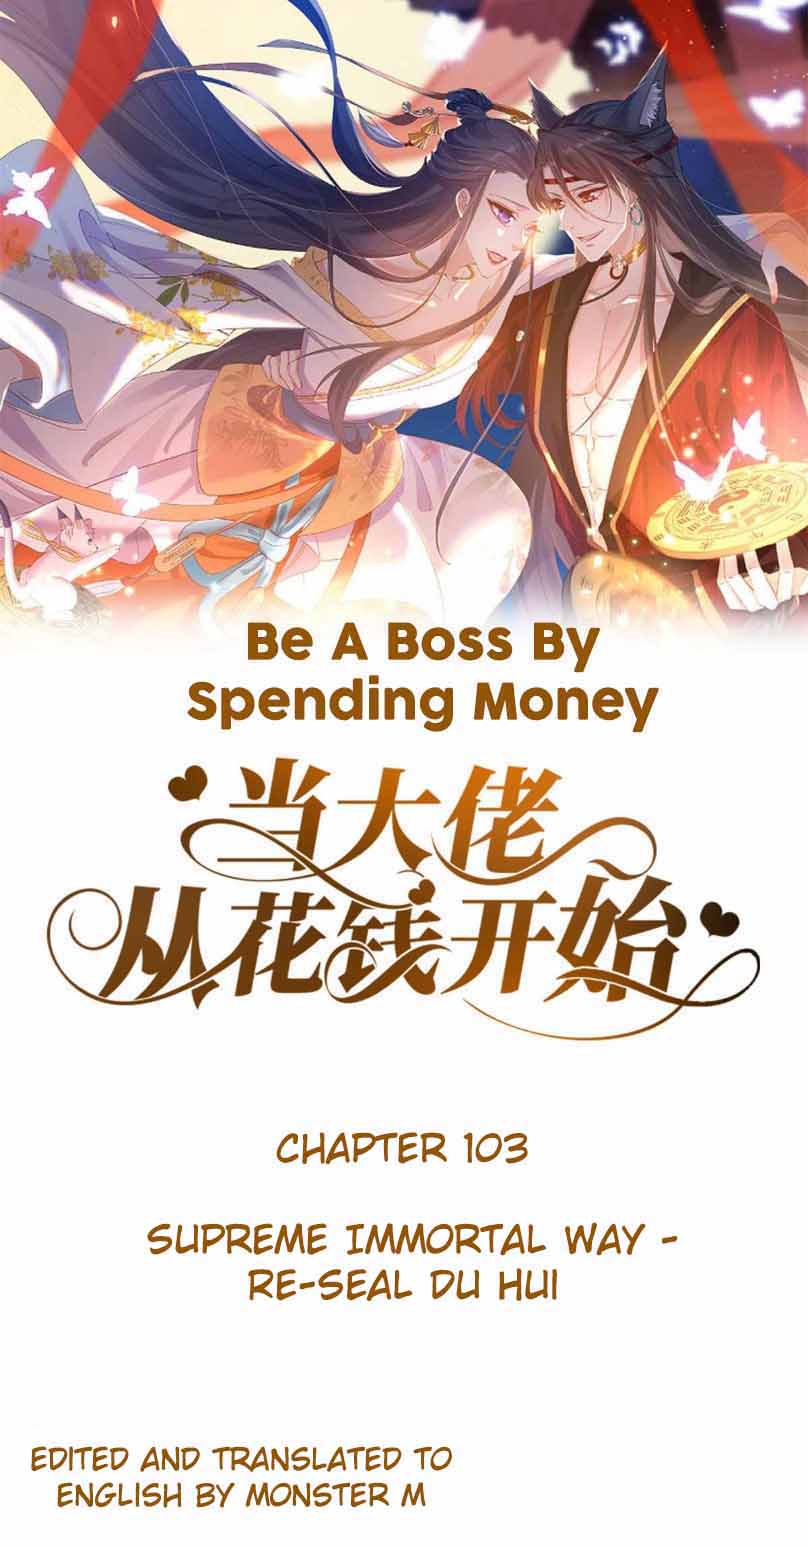 Becoming a Big Boss Starts with Spending Money chapter 103